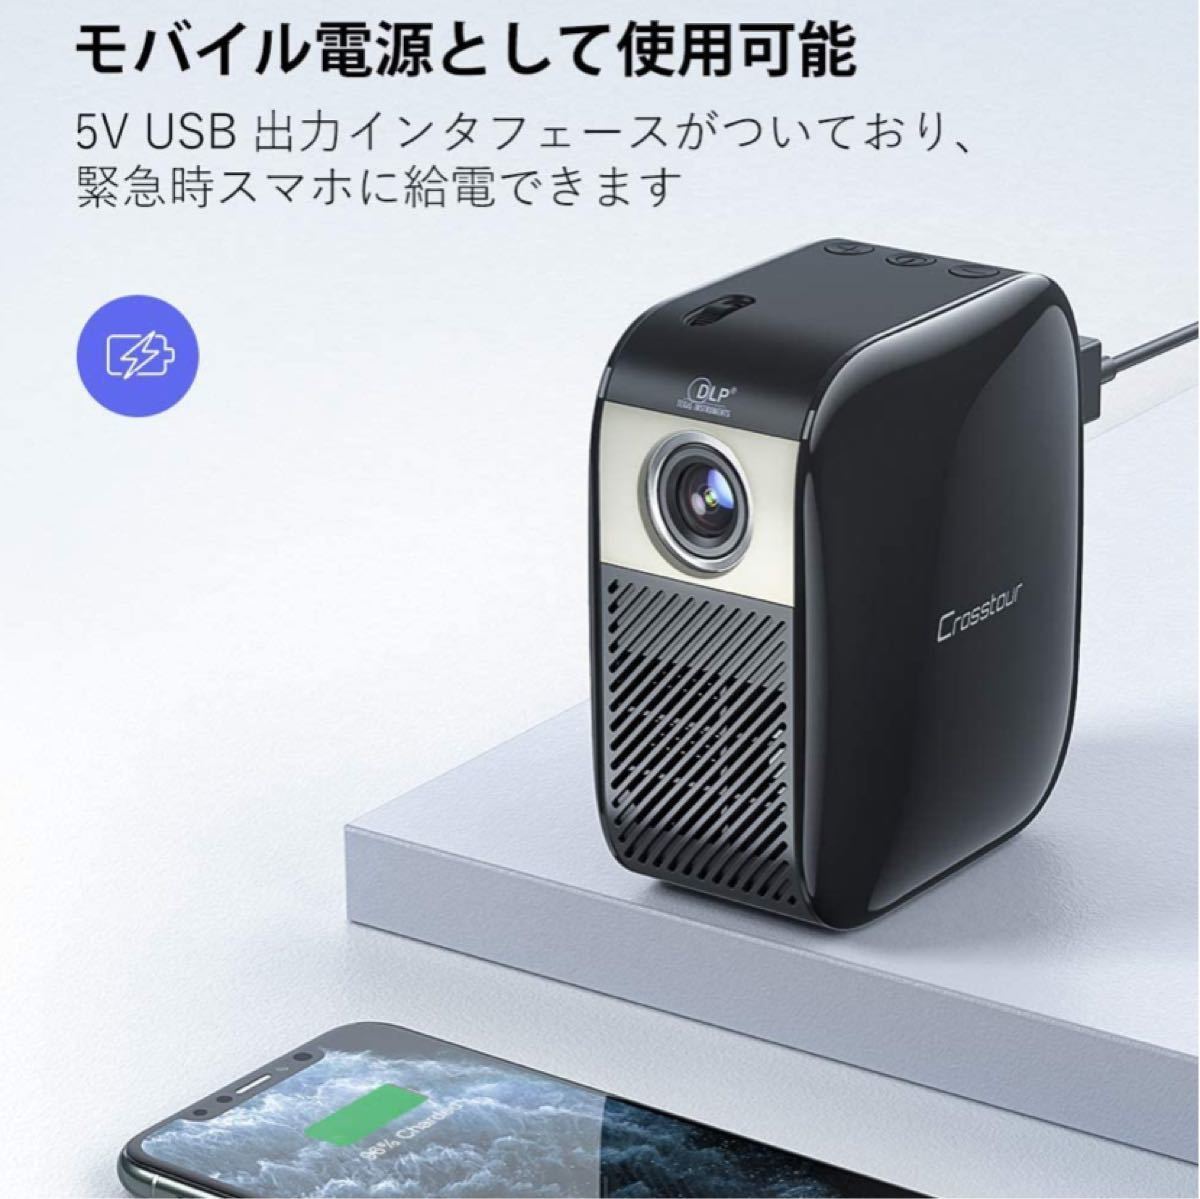  projector Mini DLP small size mobile compact projector rechargeable quiet sound compact 